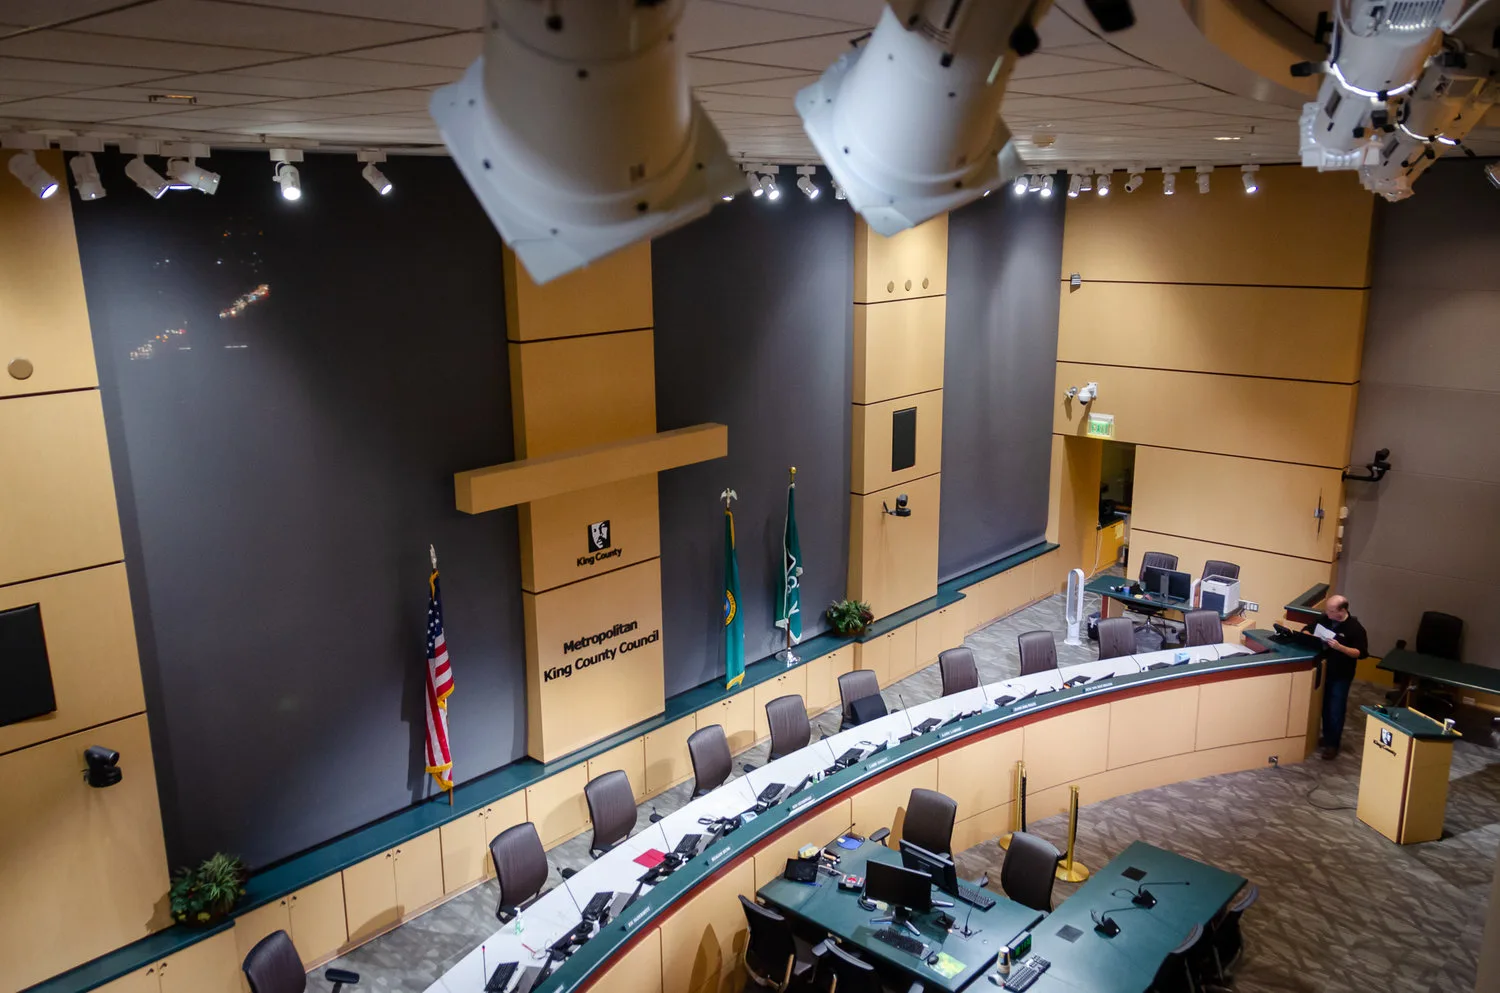 King County Council Image Jpg